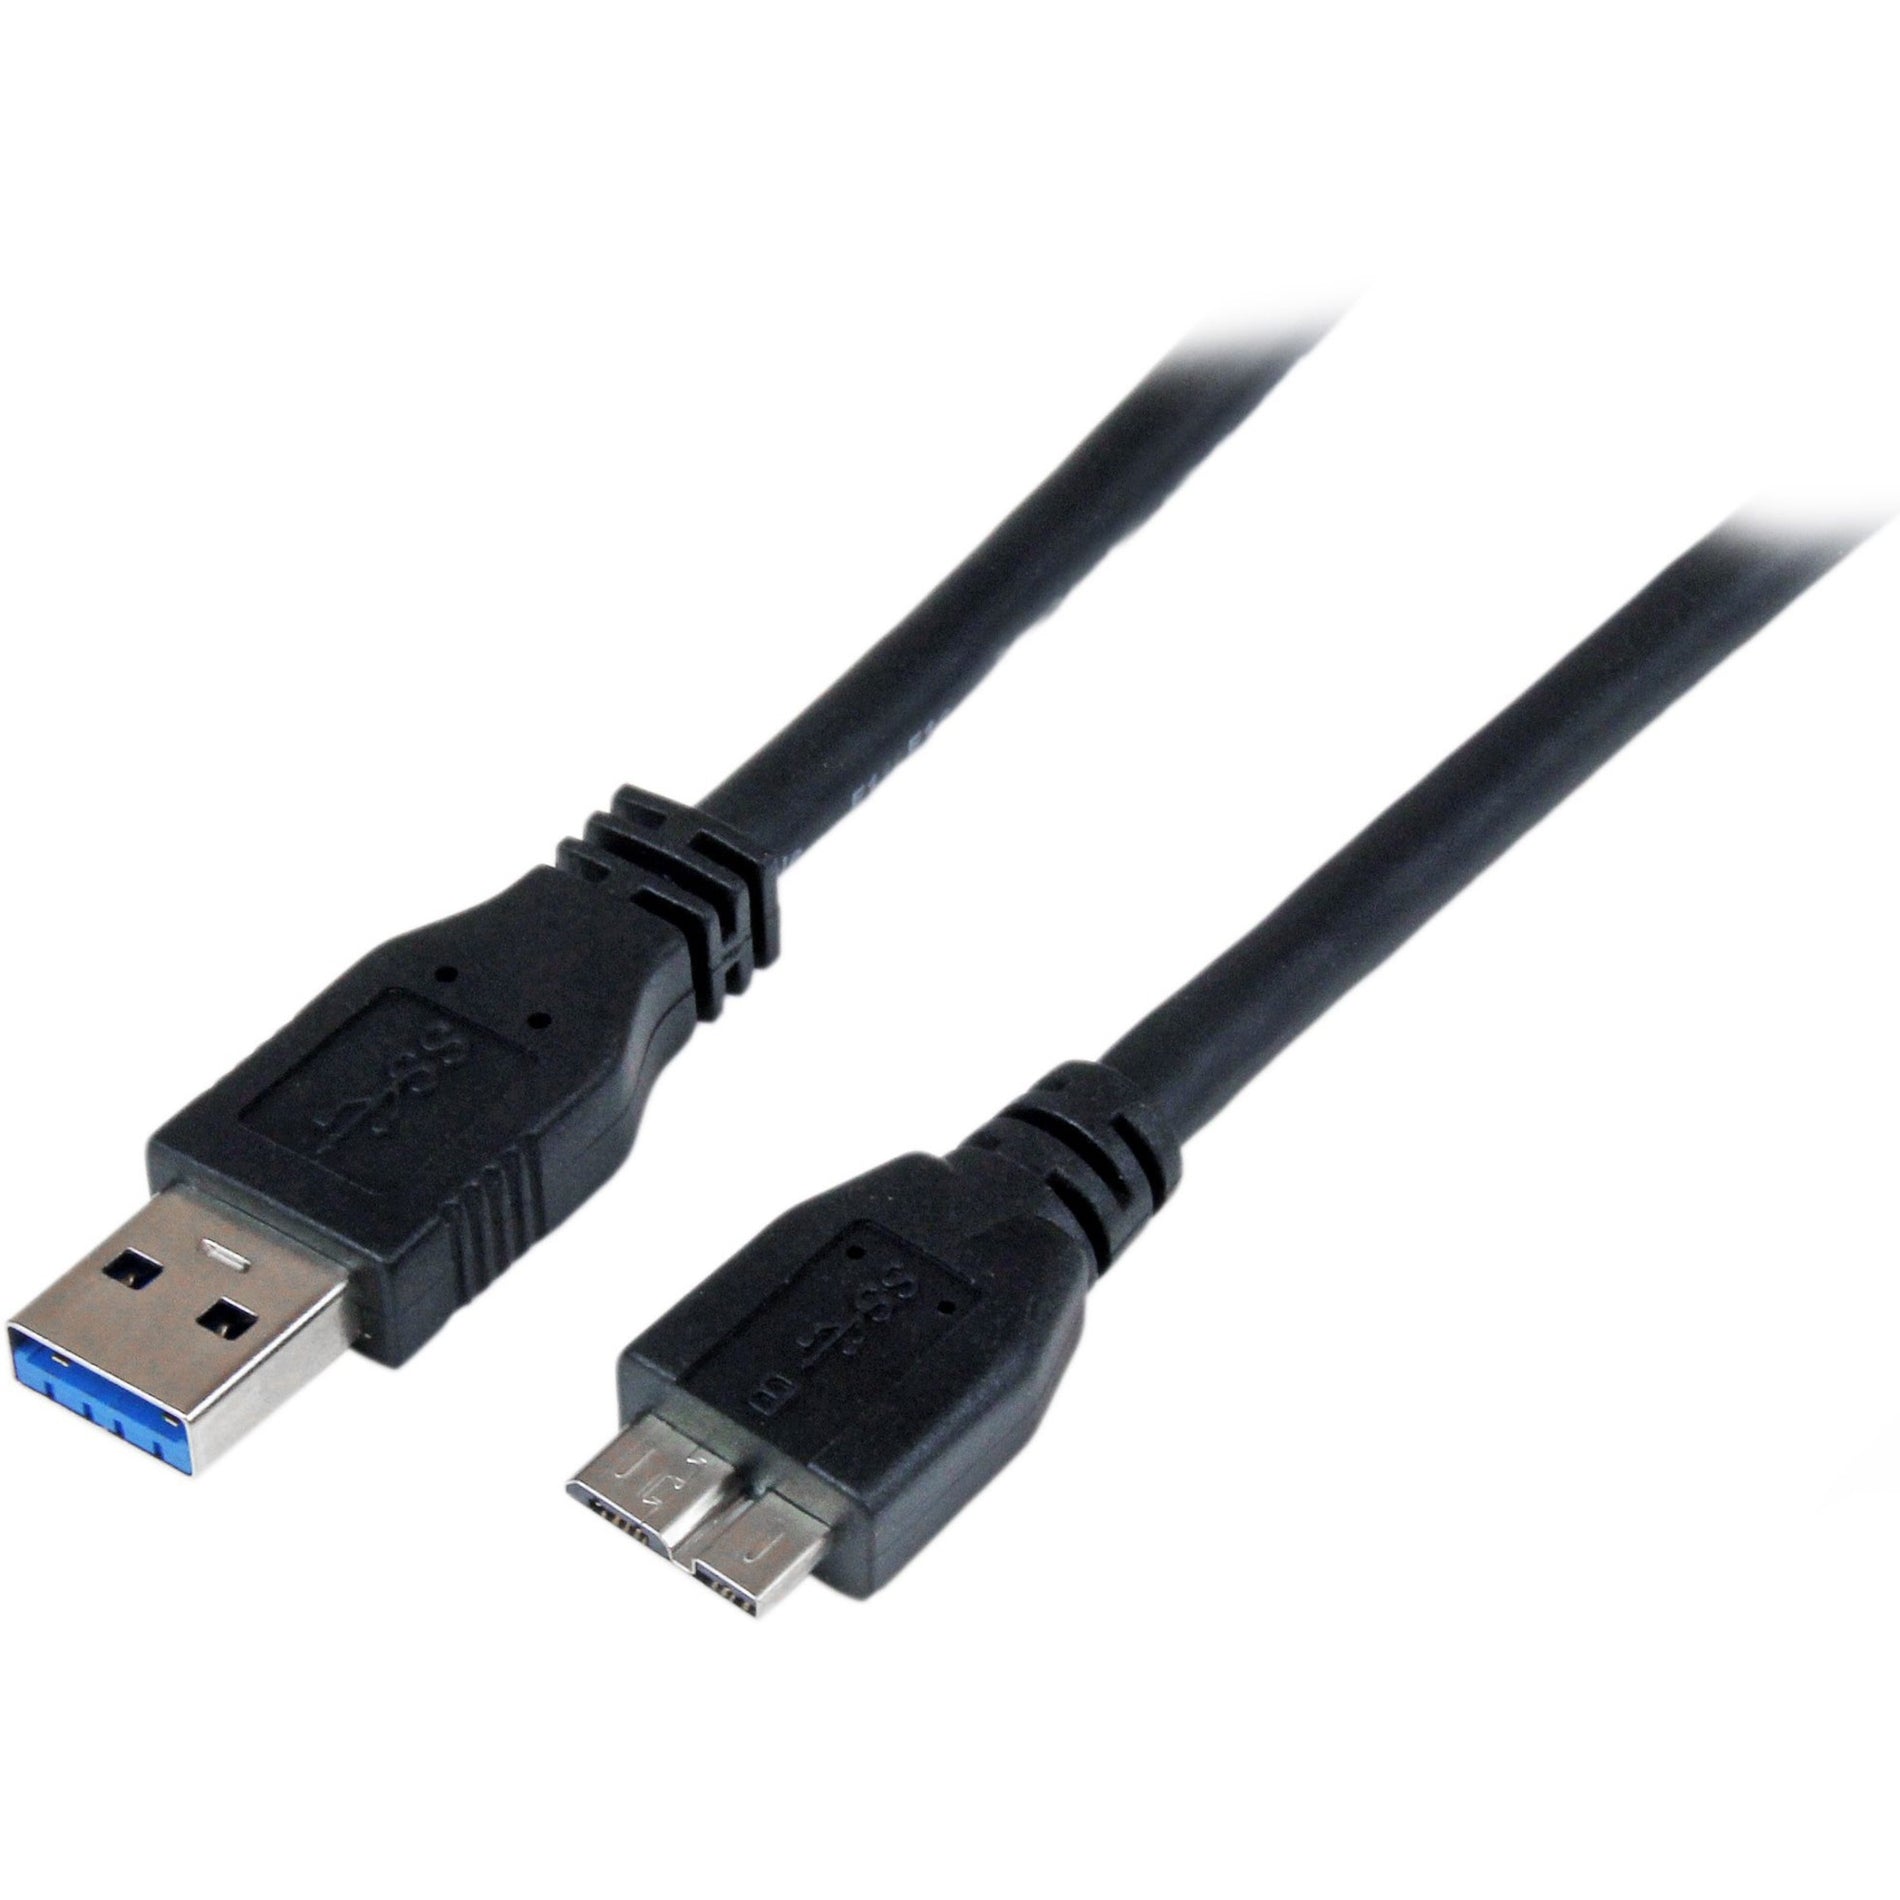 StarTech.com USB3CAUB1M 1m Certified SuperSpeed USB 3.0 A to Micro B Cable - M/M, 3ft Data Transfer Cable, 5 Gbit/s Data Transfer Rate, Strain Relief, Molded